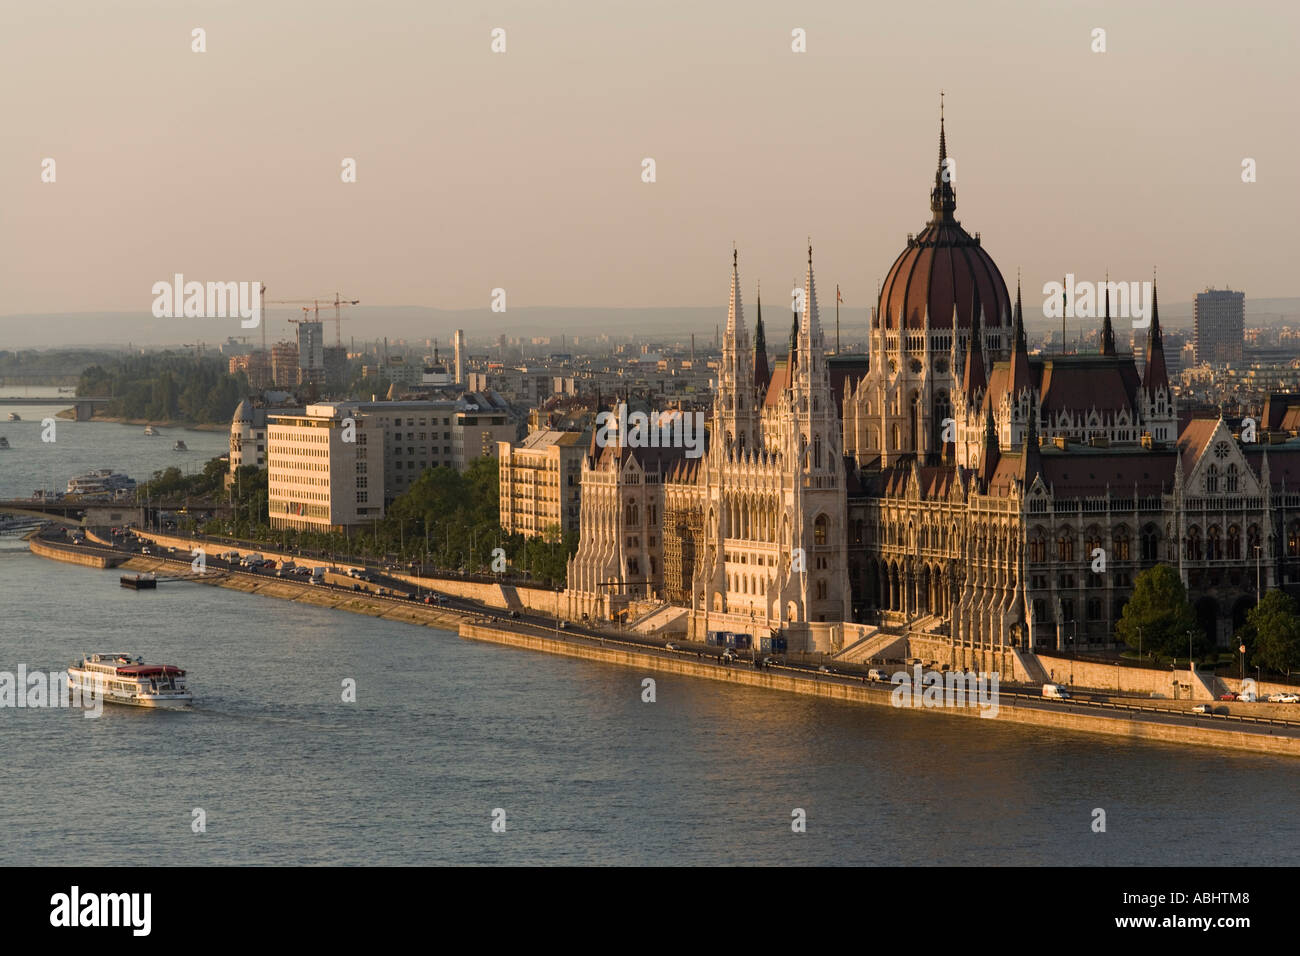 View over the Danube river with boats to the Parliament Pest Budapest Hungary Stock Photo